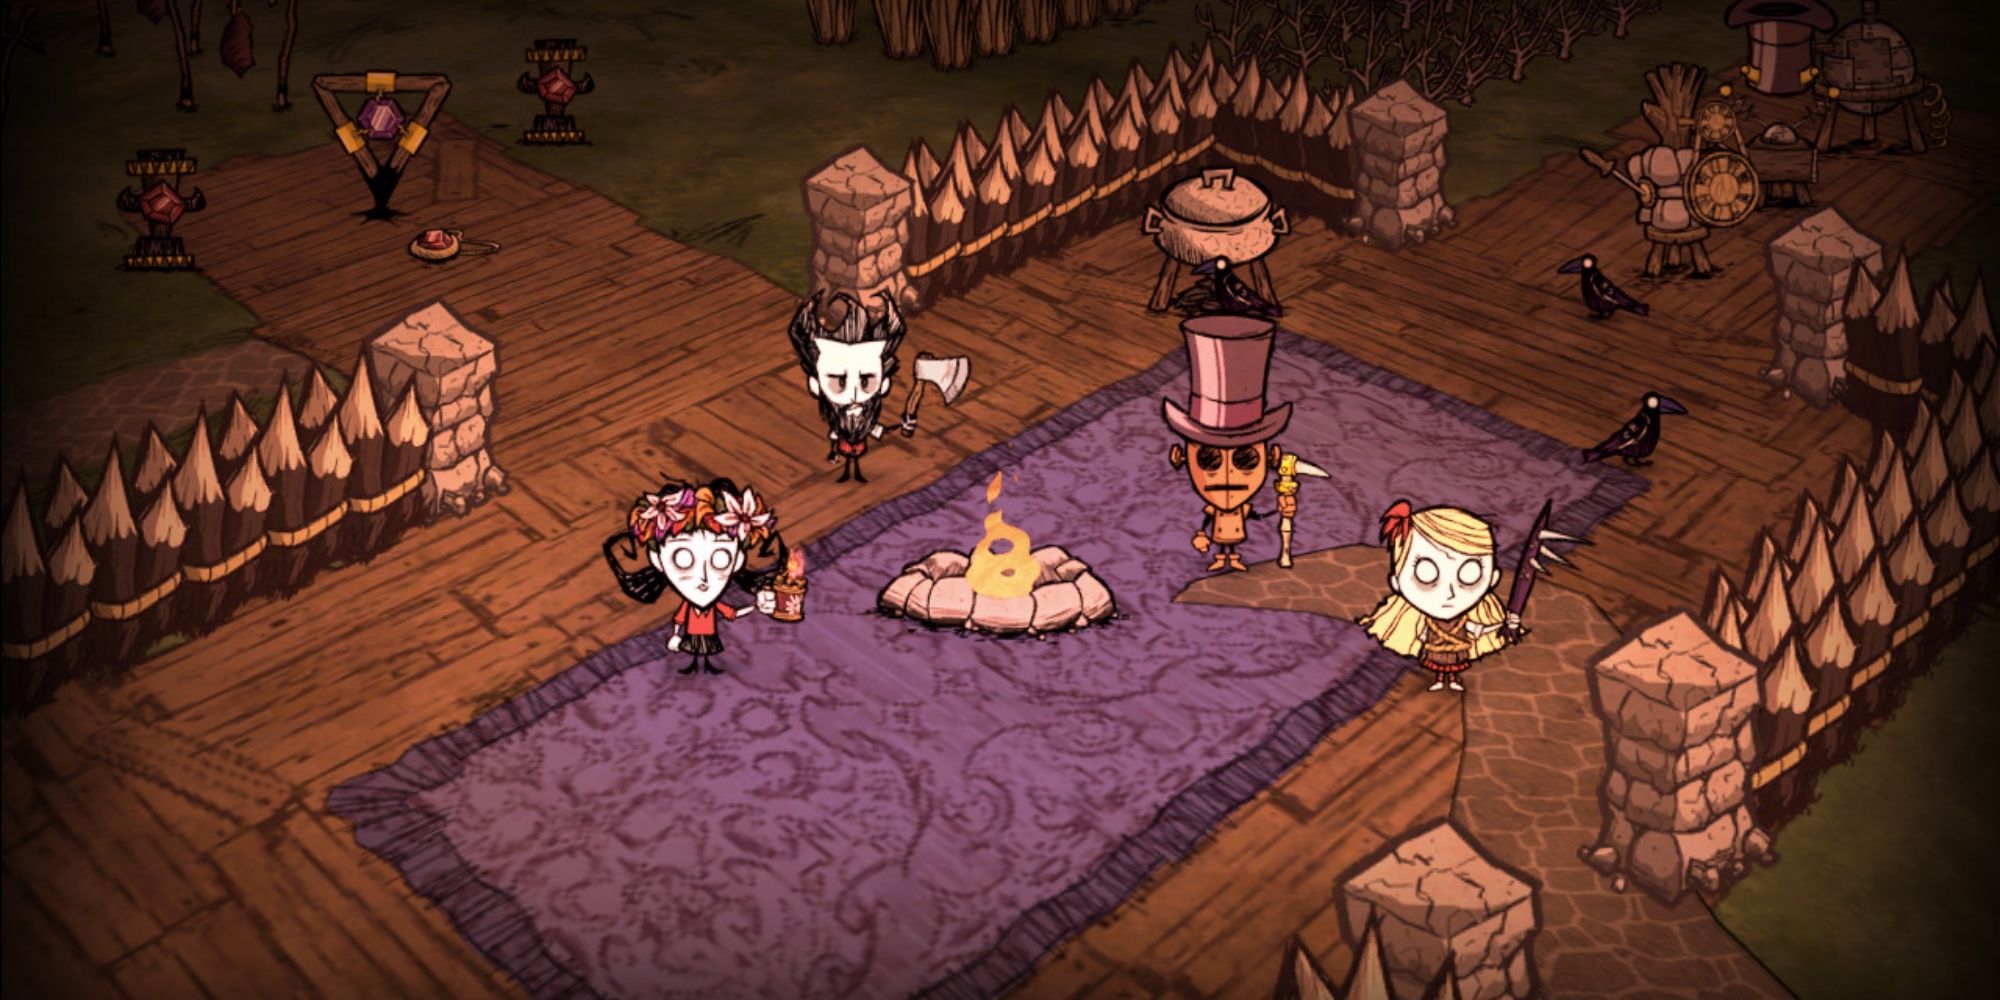 A wooden floor and purple carpet surrounded by wood spikes makes up the four character's camp